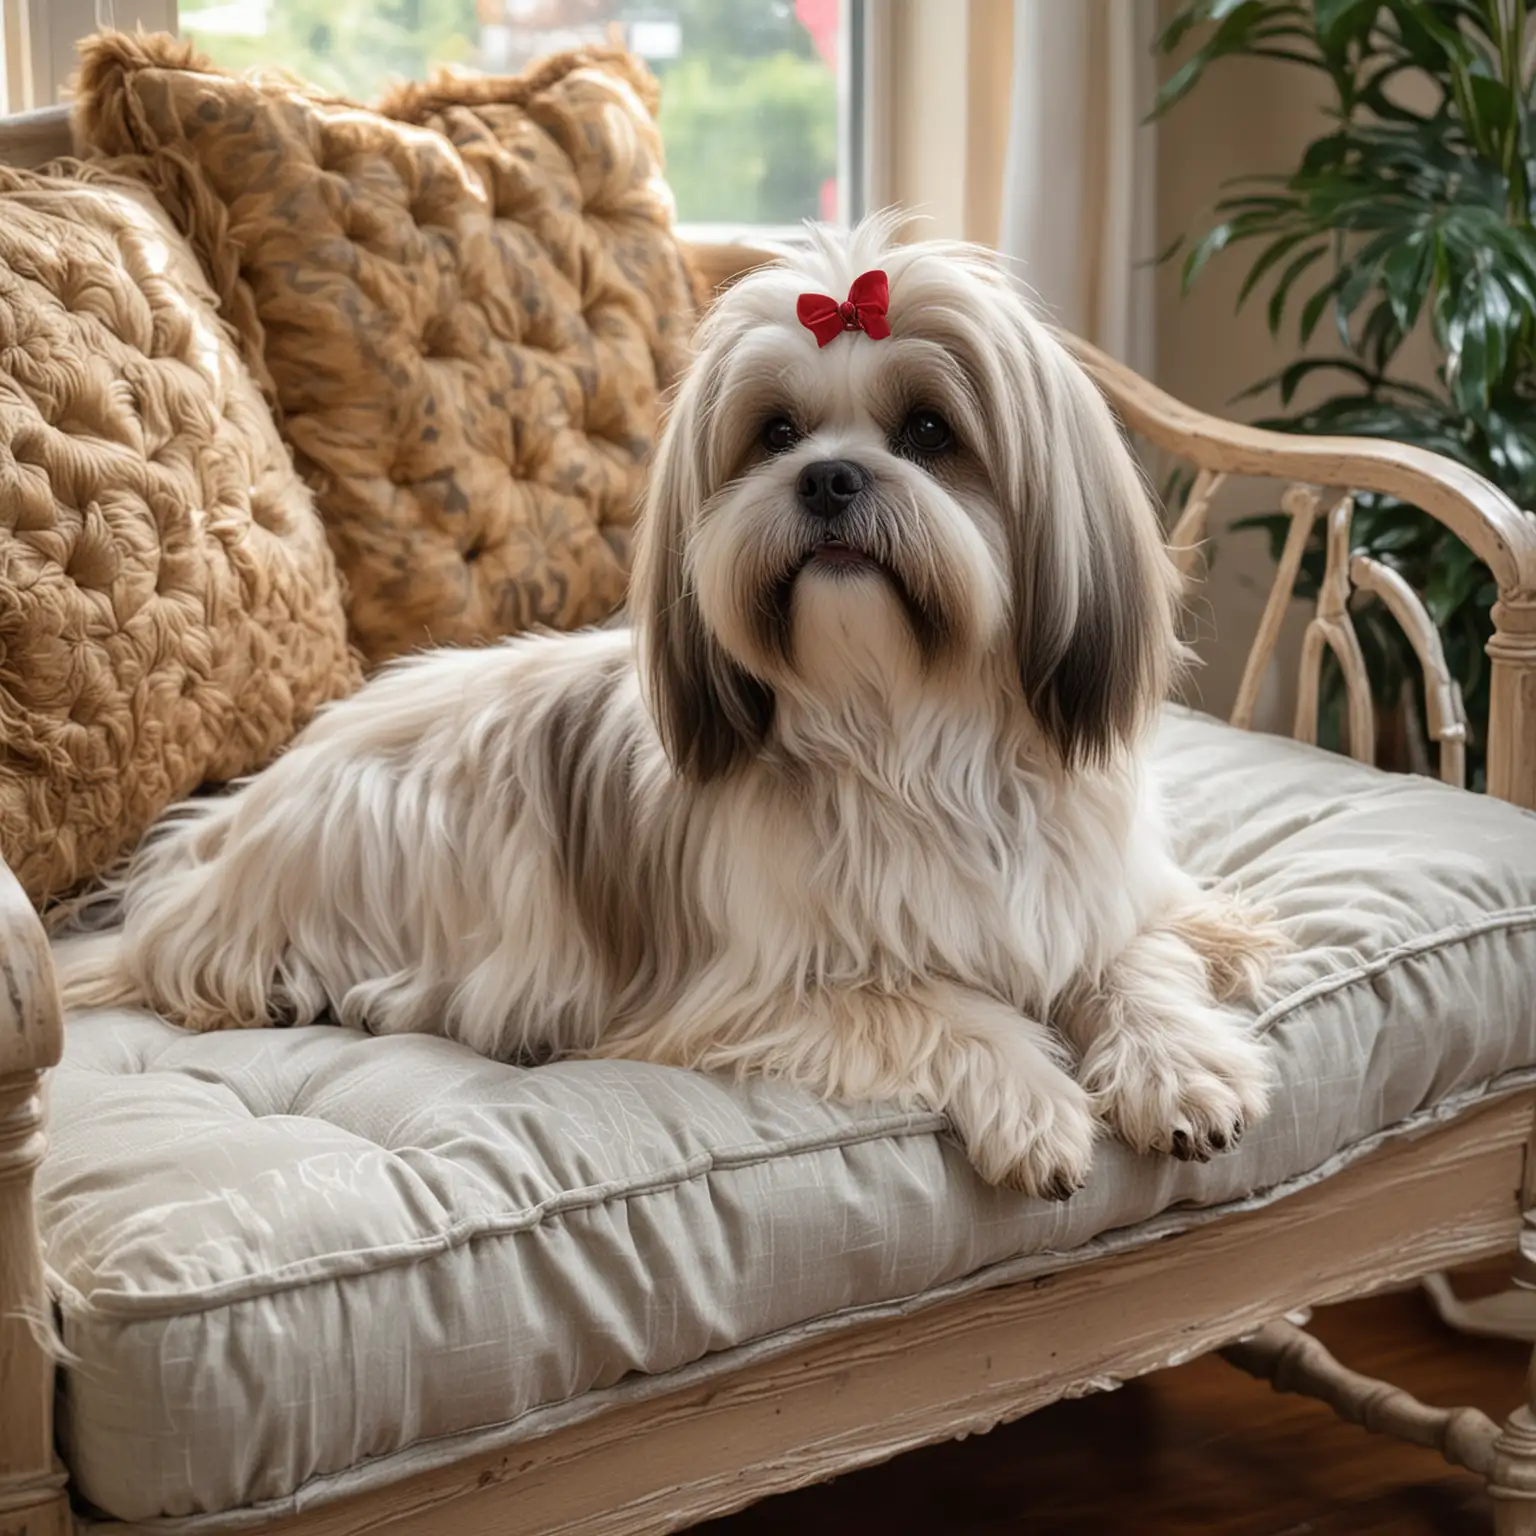 image of a beautifully groomed long haired Lhasa Apso laying on an elegant dog chaise lounge bed in the sunroom